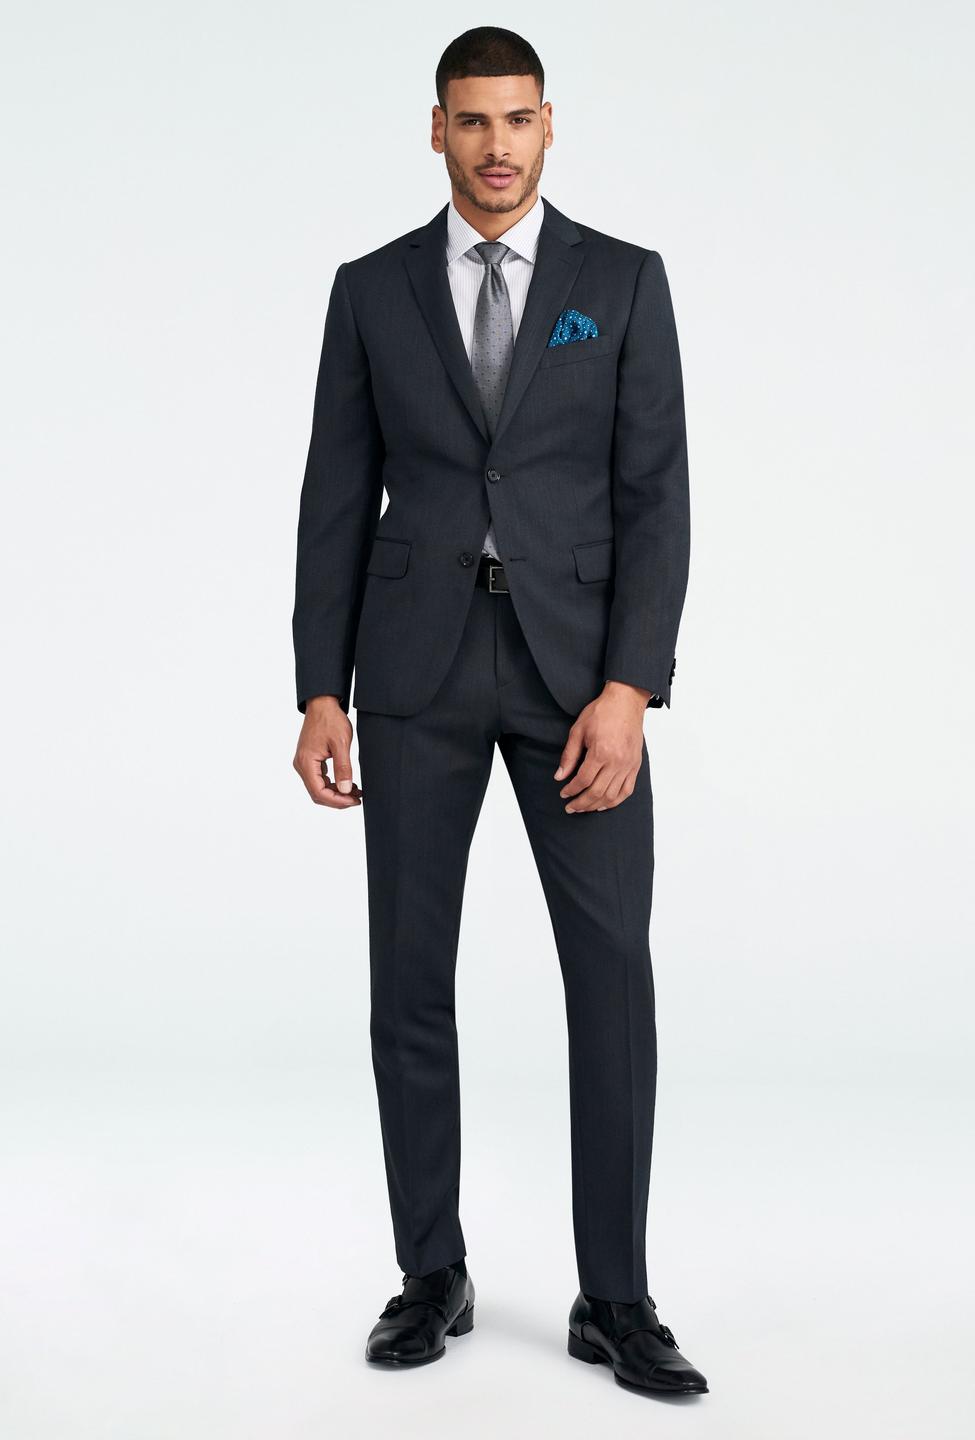 Gray suit - Hereford Solid Design from Premium Indochino Collection